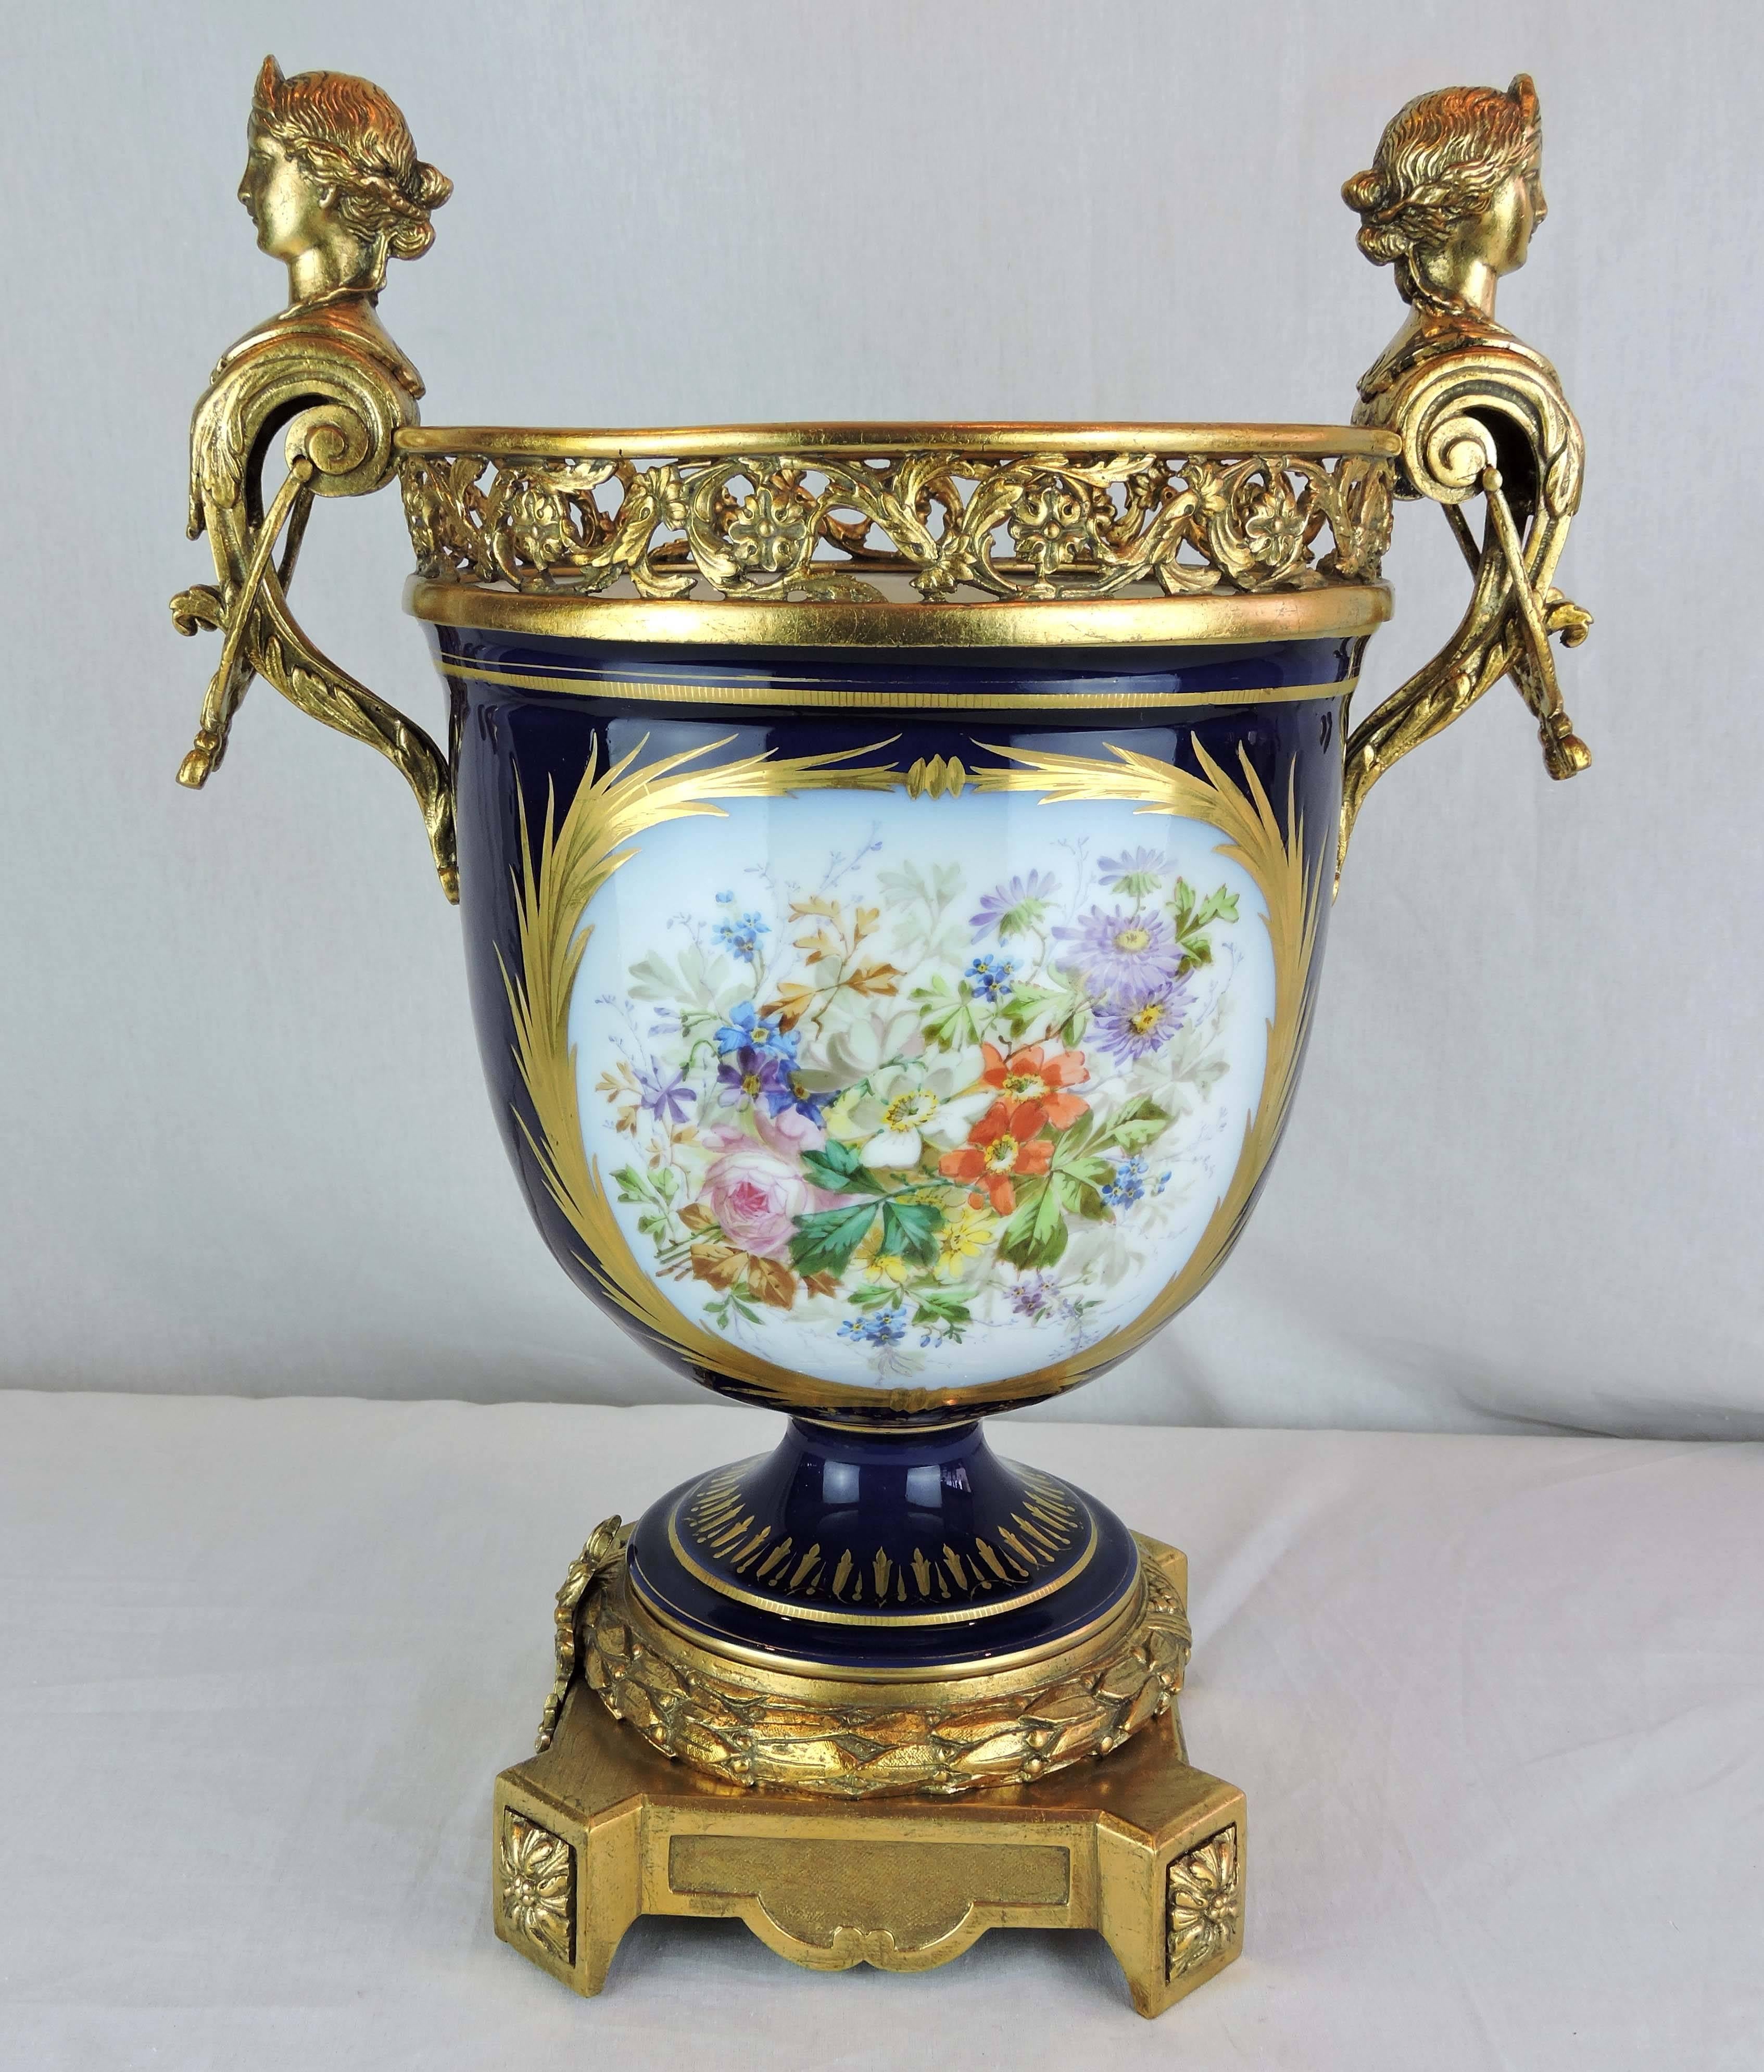 This is an urn-shaped, large French Sèvres Porcelain pedestal jardinière. It is surmounted by a pierced, foliate, gilt bronze gallery framed between a pair of neoclassical figural handles. 

The cobalt blue body is decorated with two, large,